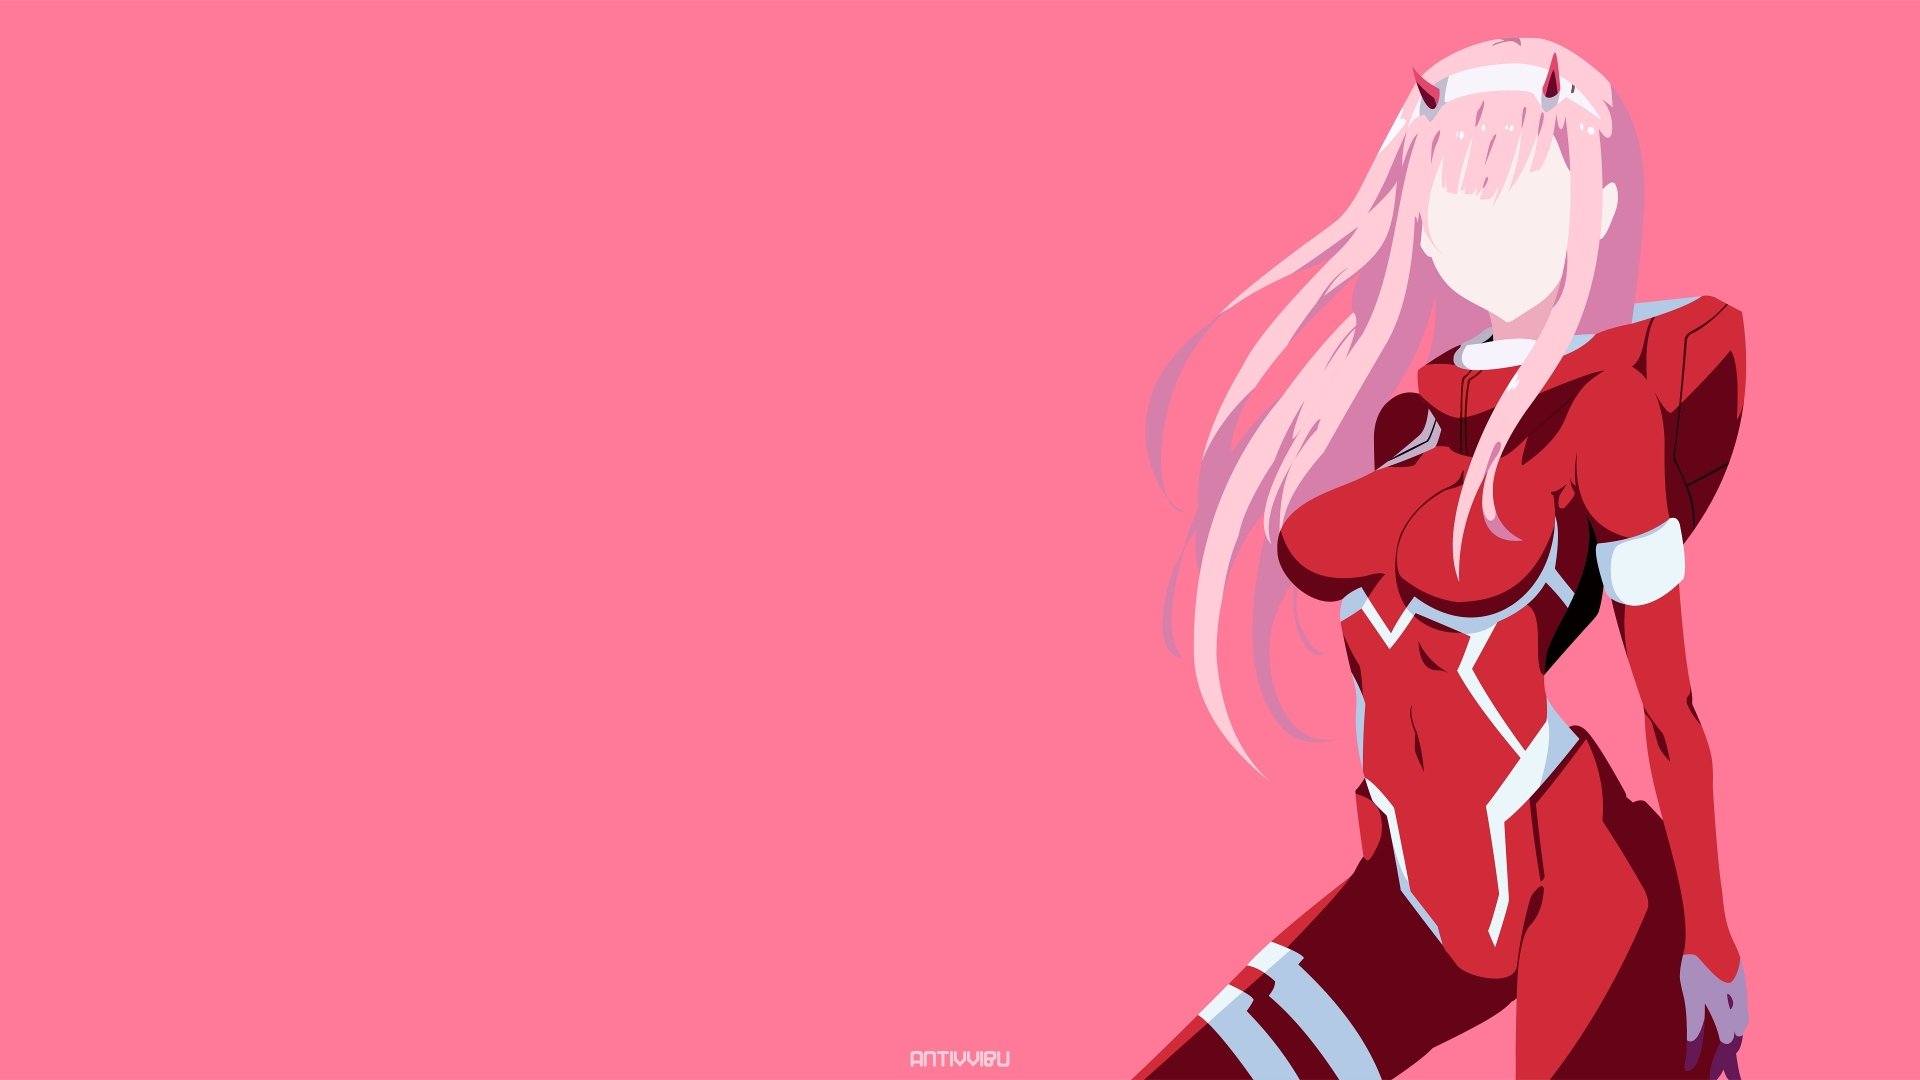 Anime Darling In The Franxx 4k Ultra Hd Wallpaper By Lembayung 3523